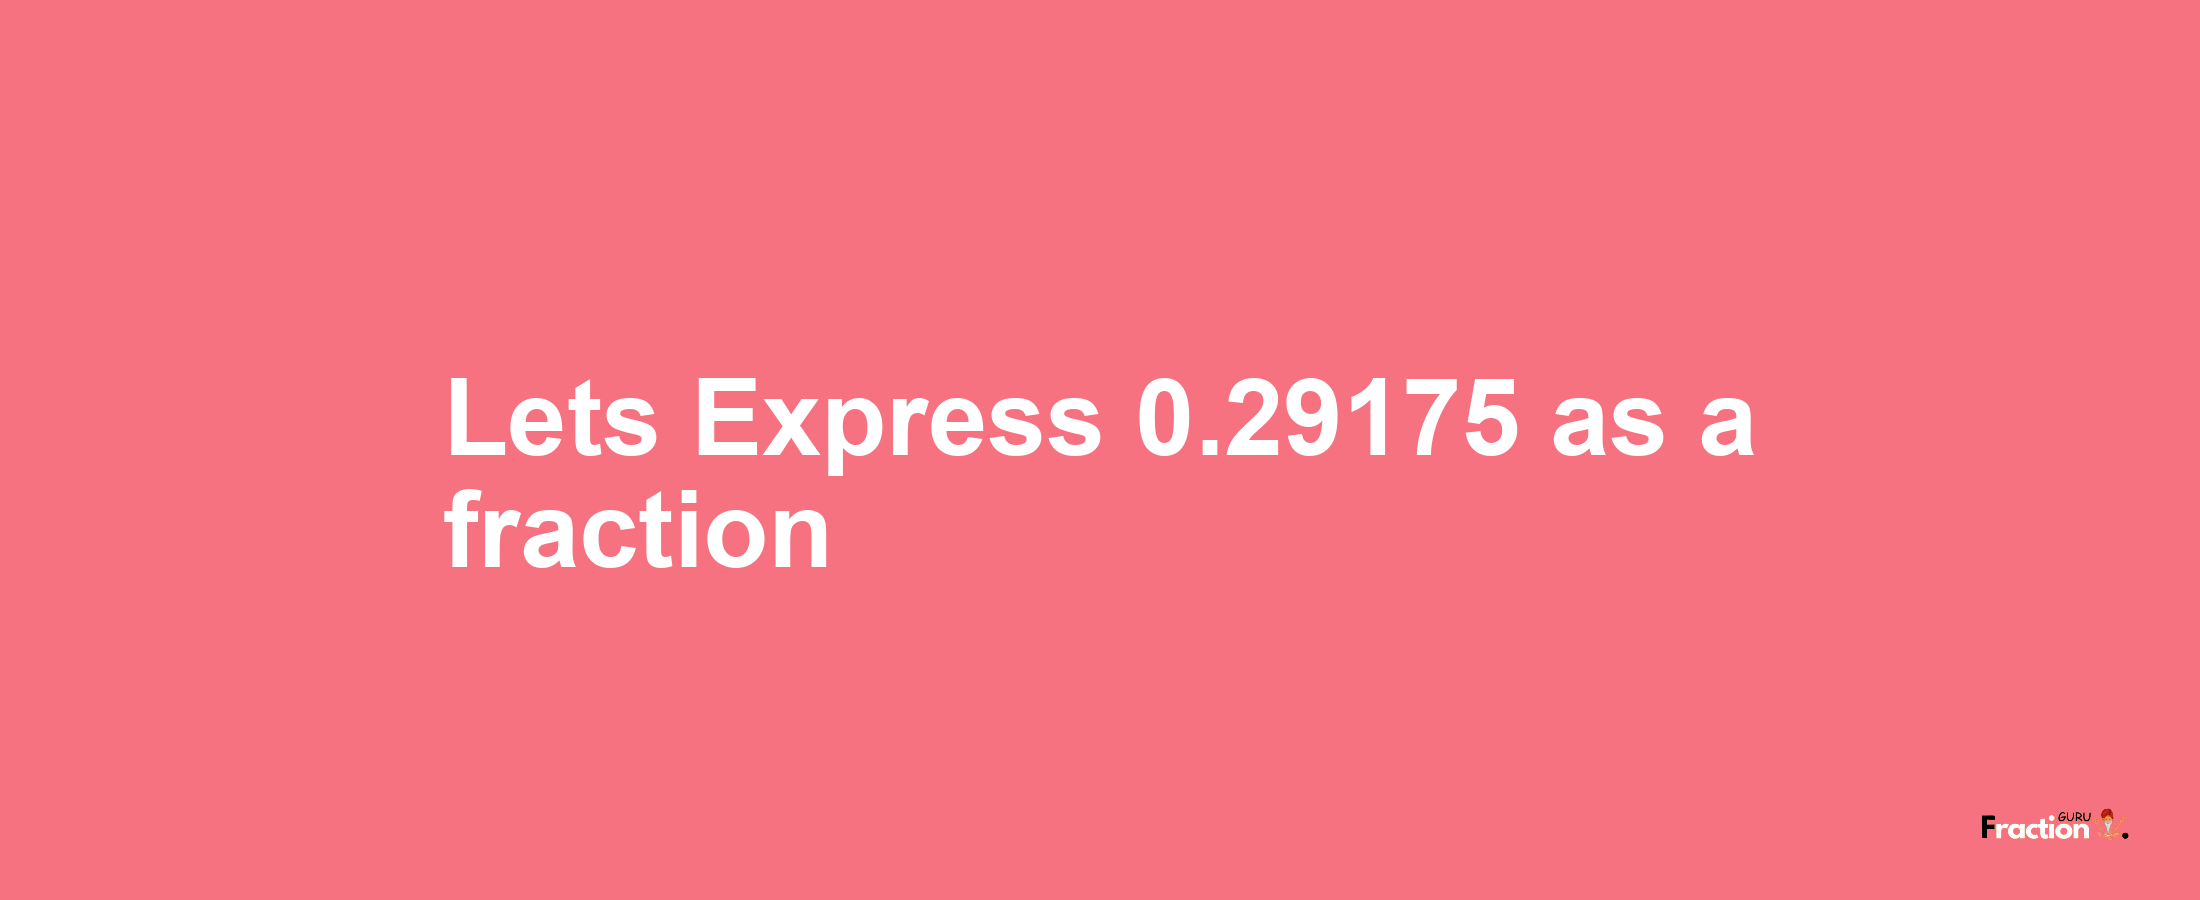 Lets Express 0.29175 as afraction